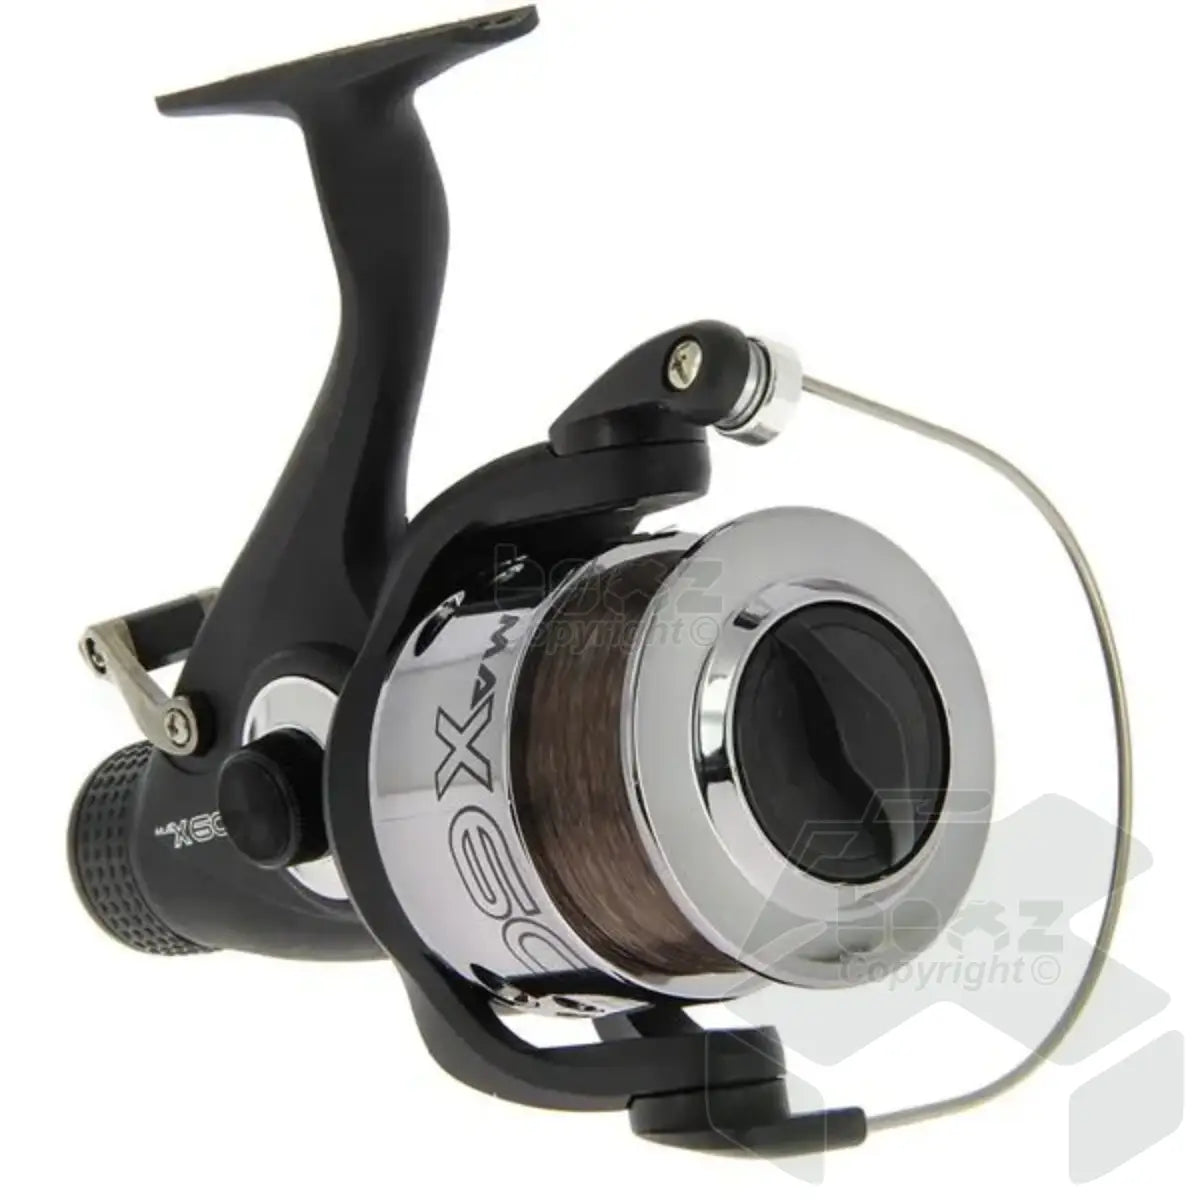 Angling Pursuits Max 60 - 2BB Carp Runner Reel with 10lb Line